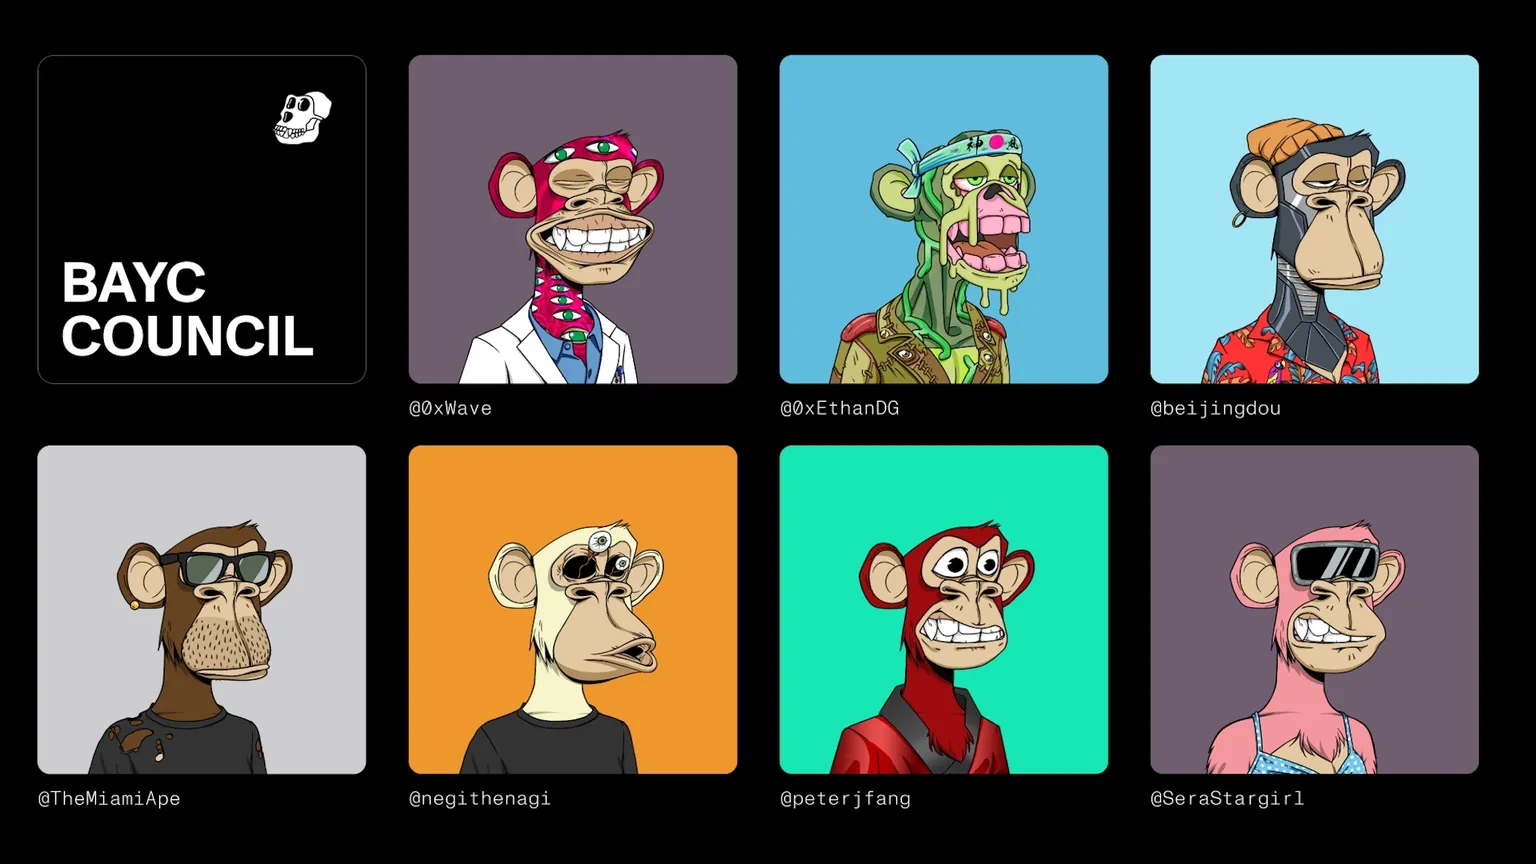 Image of BAYC council showing seven photos of 2D cartoon Apes with different-colored fur. Some wear glasses, hats, labcoats, etc.